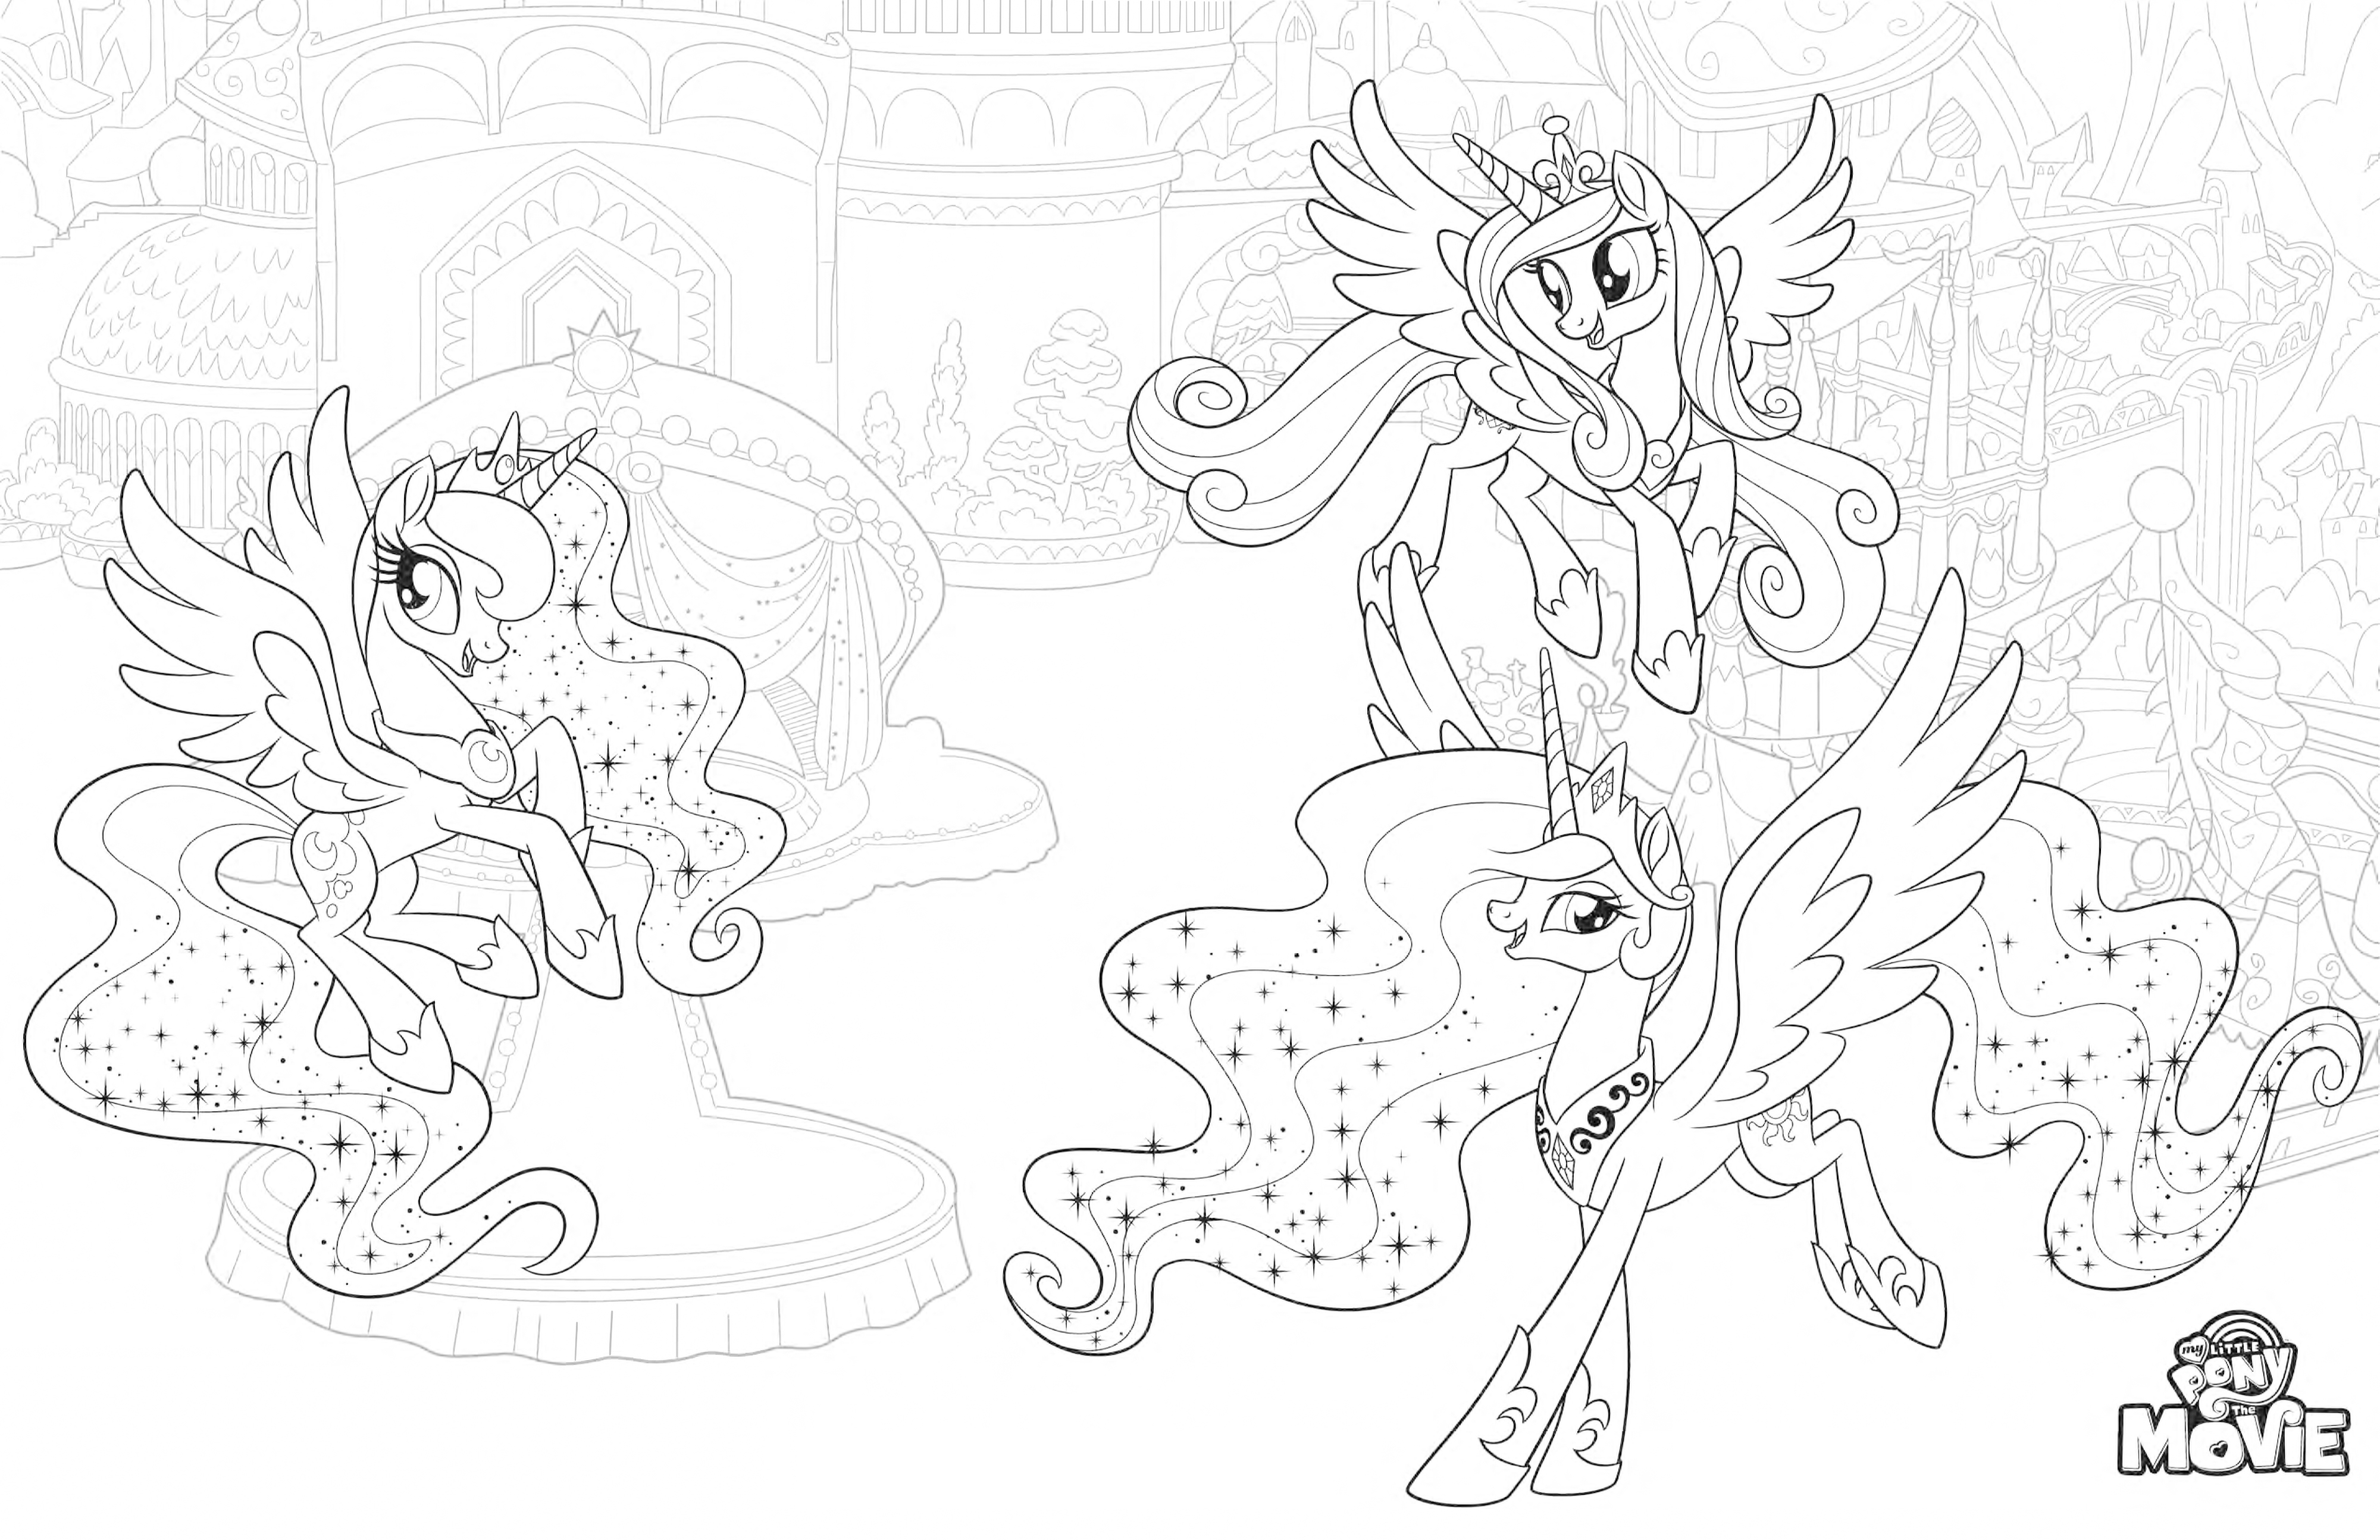 21+ nice image My Little Pony Coloring Pages Princess Celestia And Luna